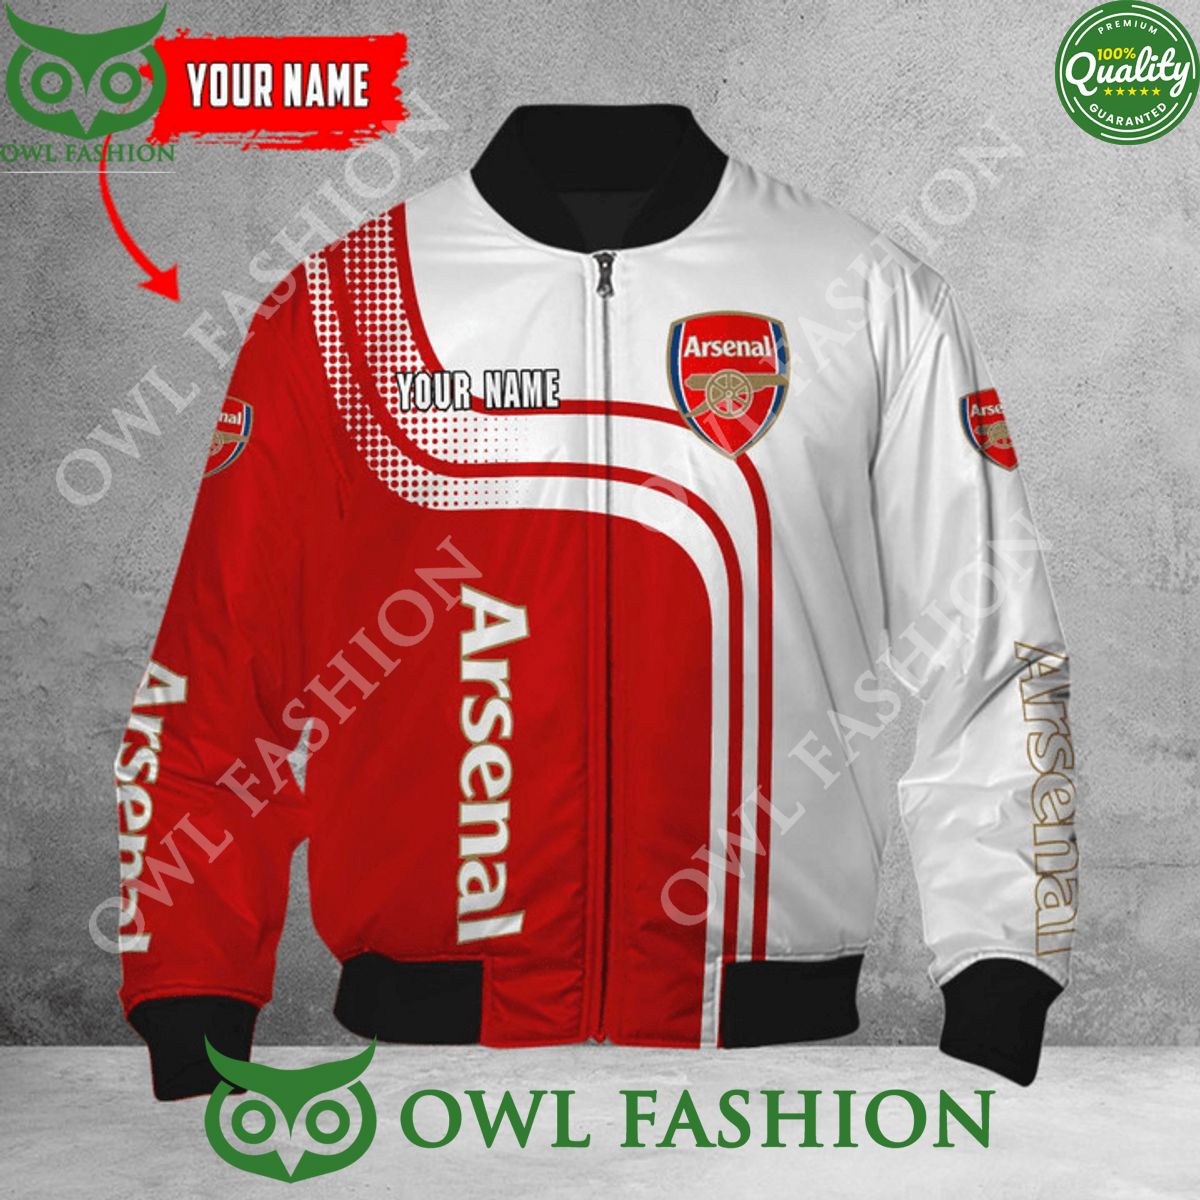 personalized arsenal epl red and white bomber jacket 1 tgTMj.jpg